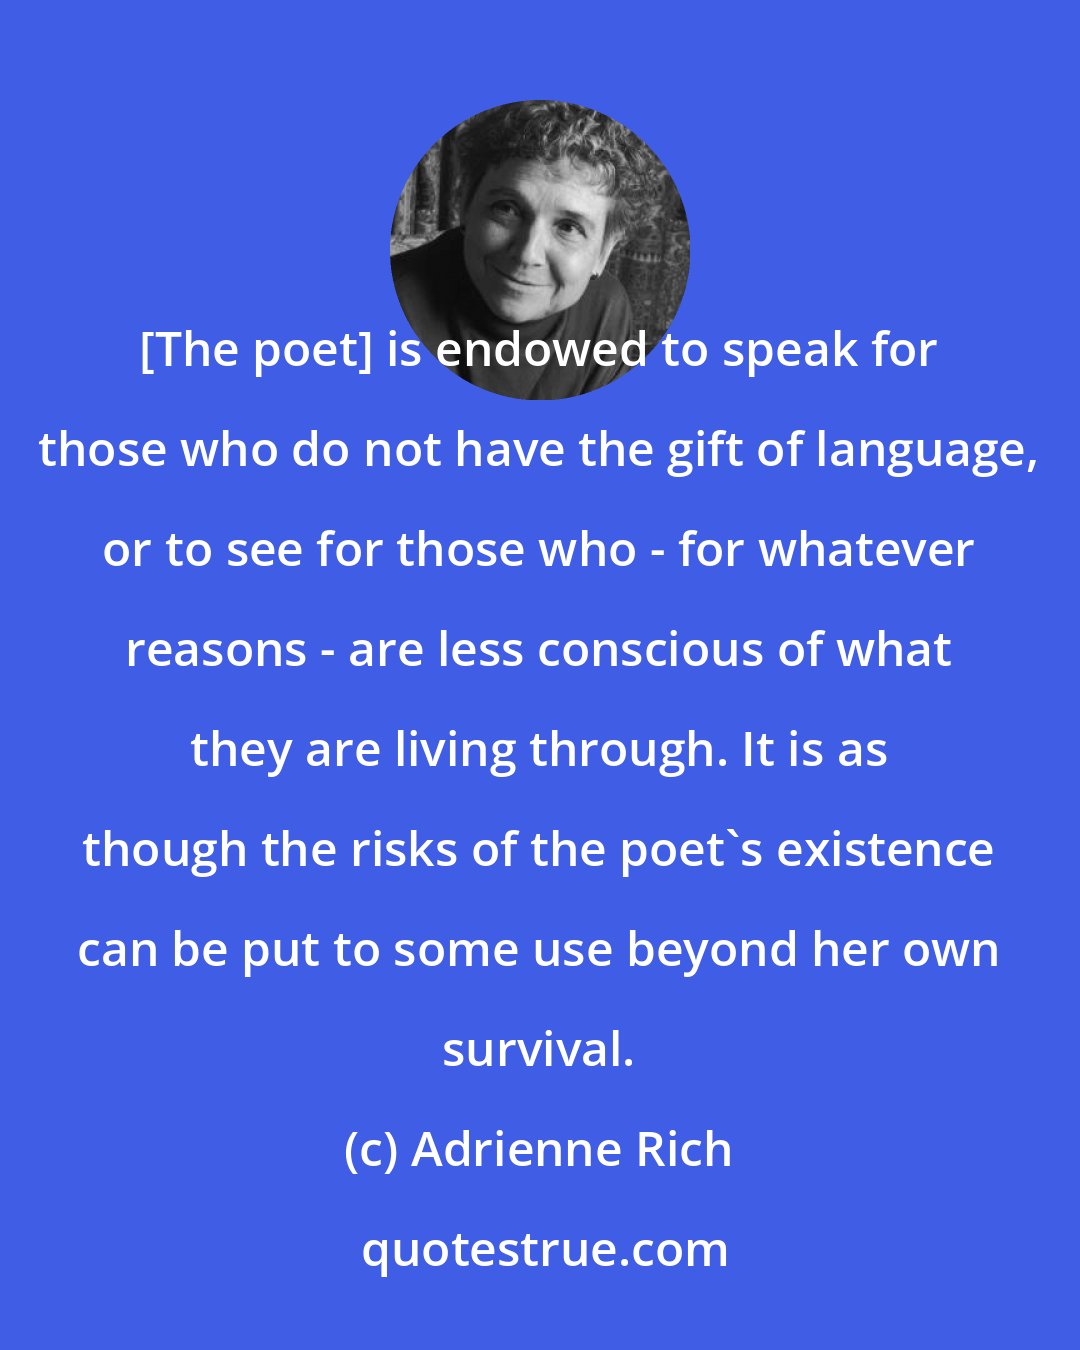 Adrienne Rich: [The poet] is endowed to speak for those who do not have the gift of language, or to see for those who - for whatever reasons - are less conscious of what they are living through. It is as though the risks of the poet's existence can be put to some use beyond her own survival.